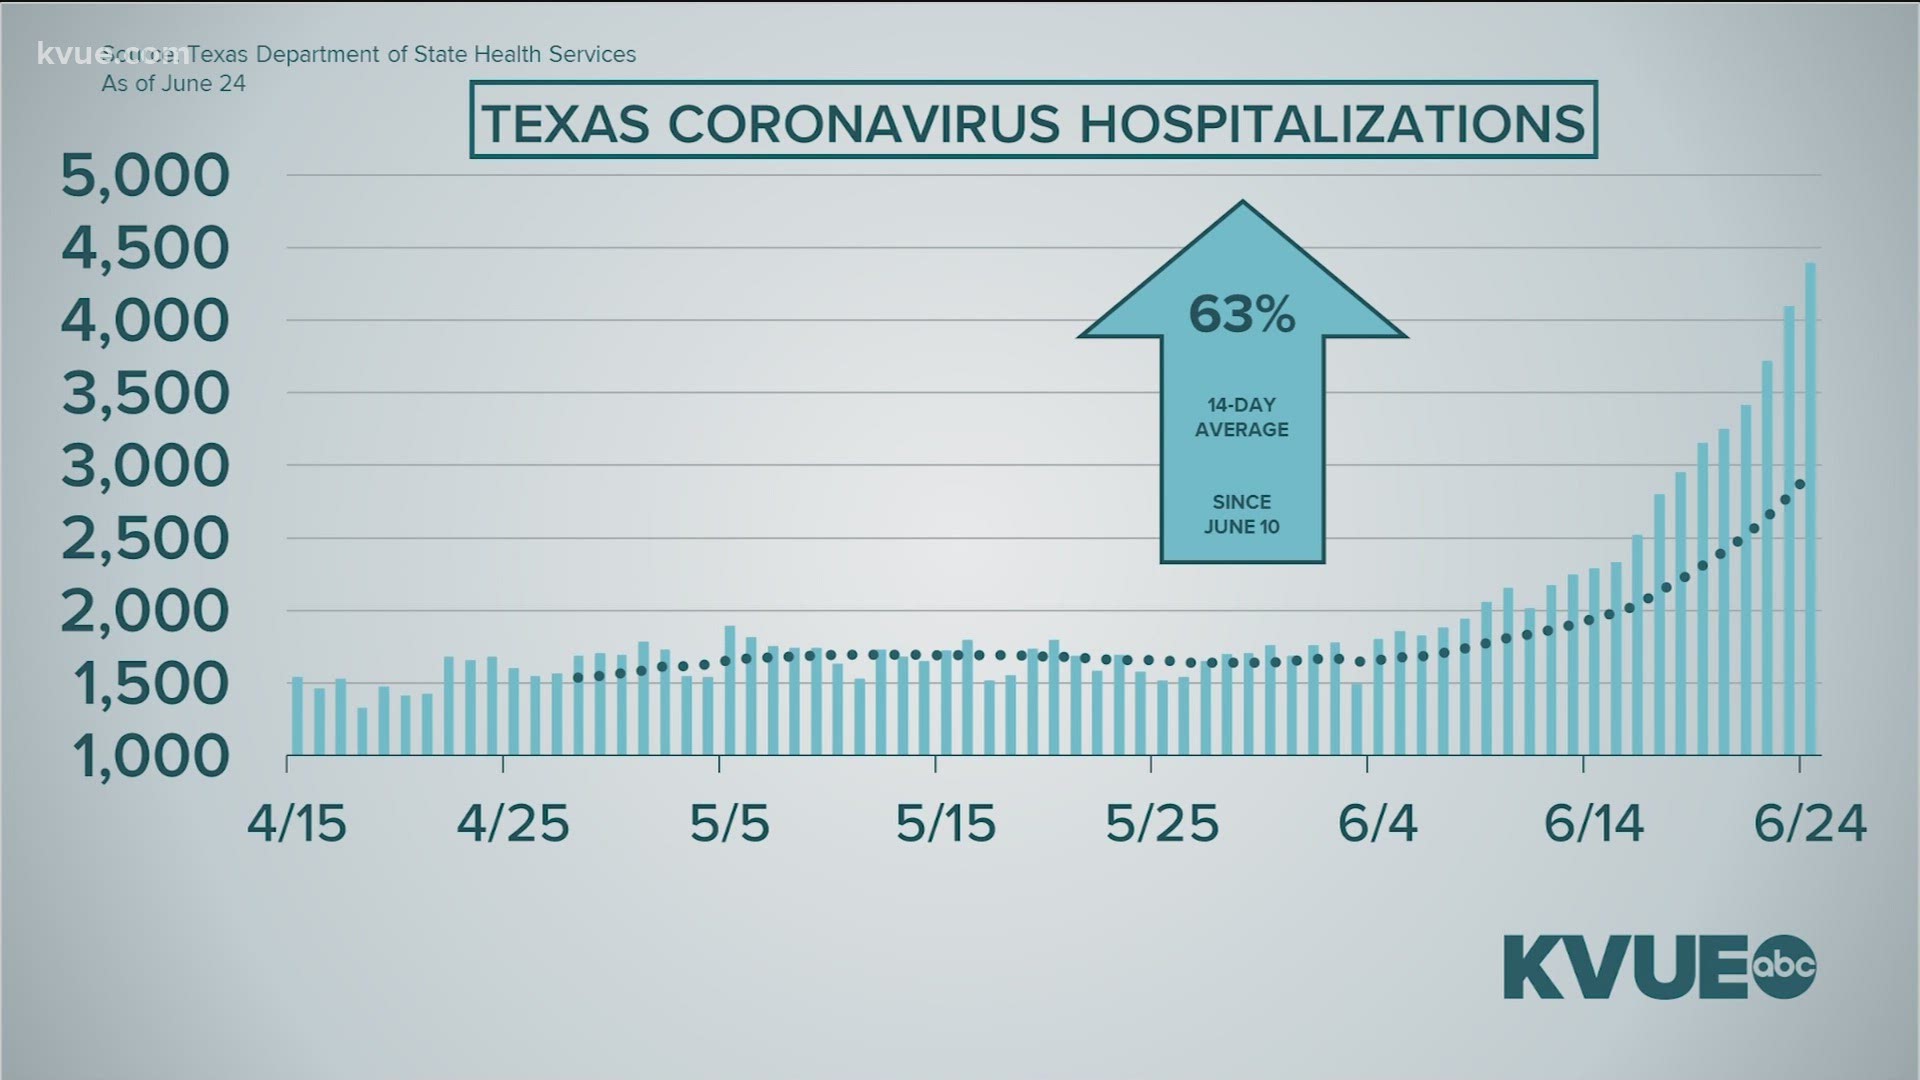 For the 13th day in a row, Texas broke its COVID-19 hospitalizations record. Nearly 4,500 Texans are in the hospital with the virus as of June 24.